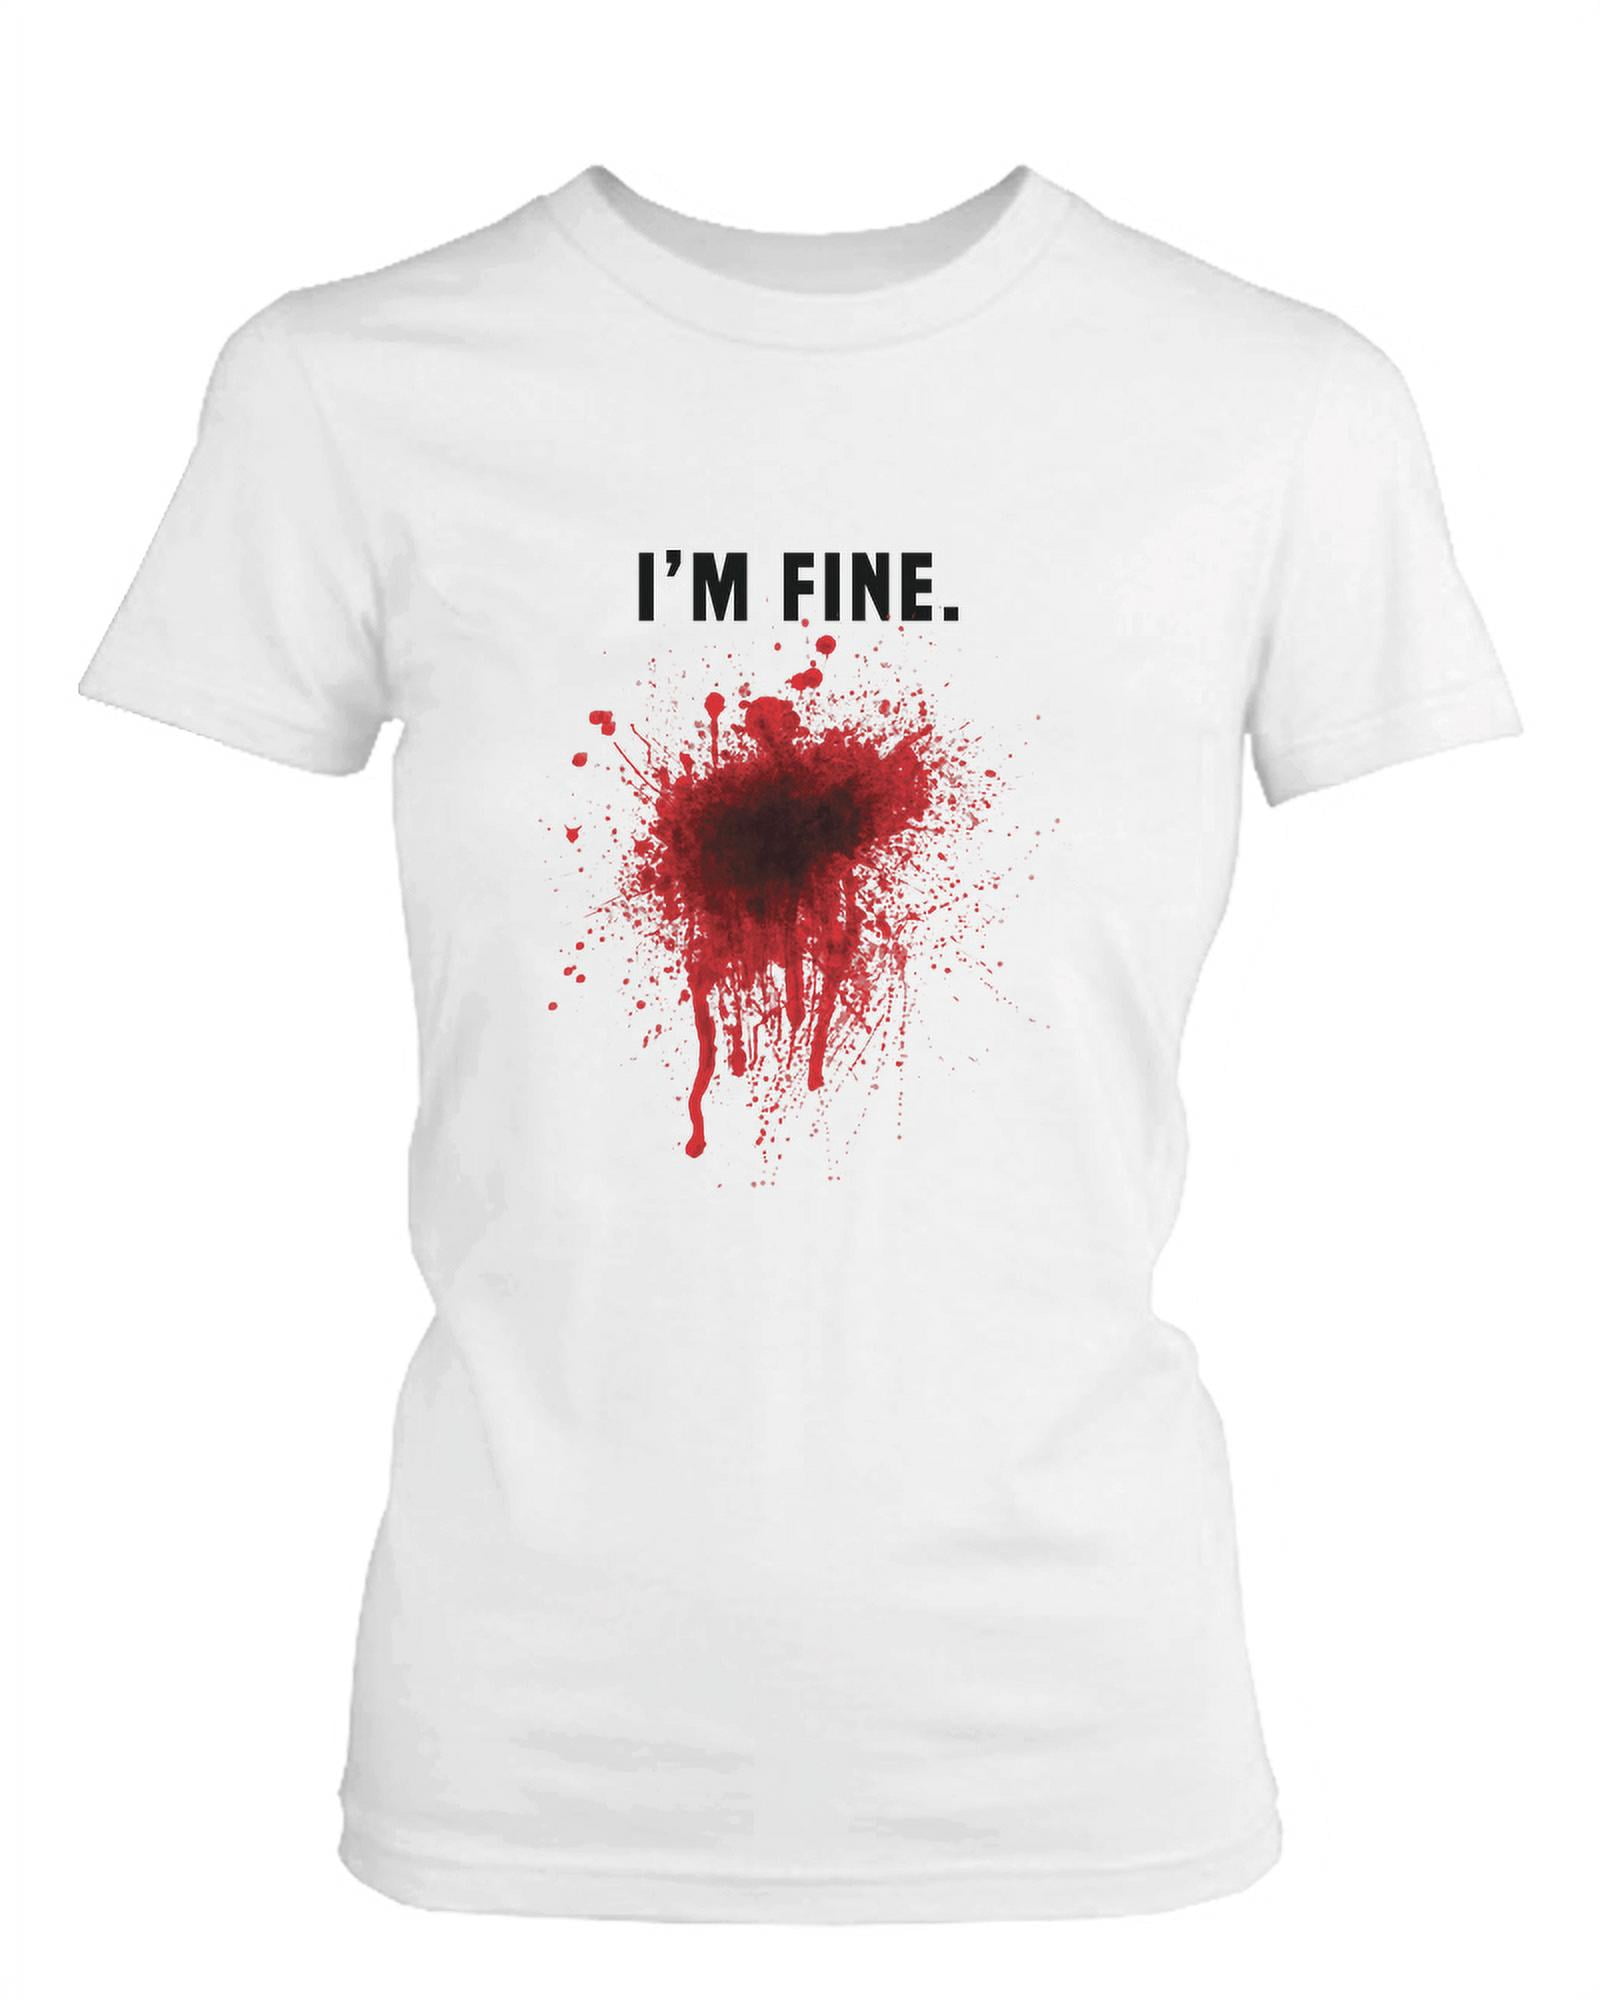 Women Fashion Halloween Humor Funny Bloods I'm Fine Print O,Prime Deals  Today,Cheap,Under 1 Dollar Items only,Deals of The Day Clearance Red